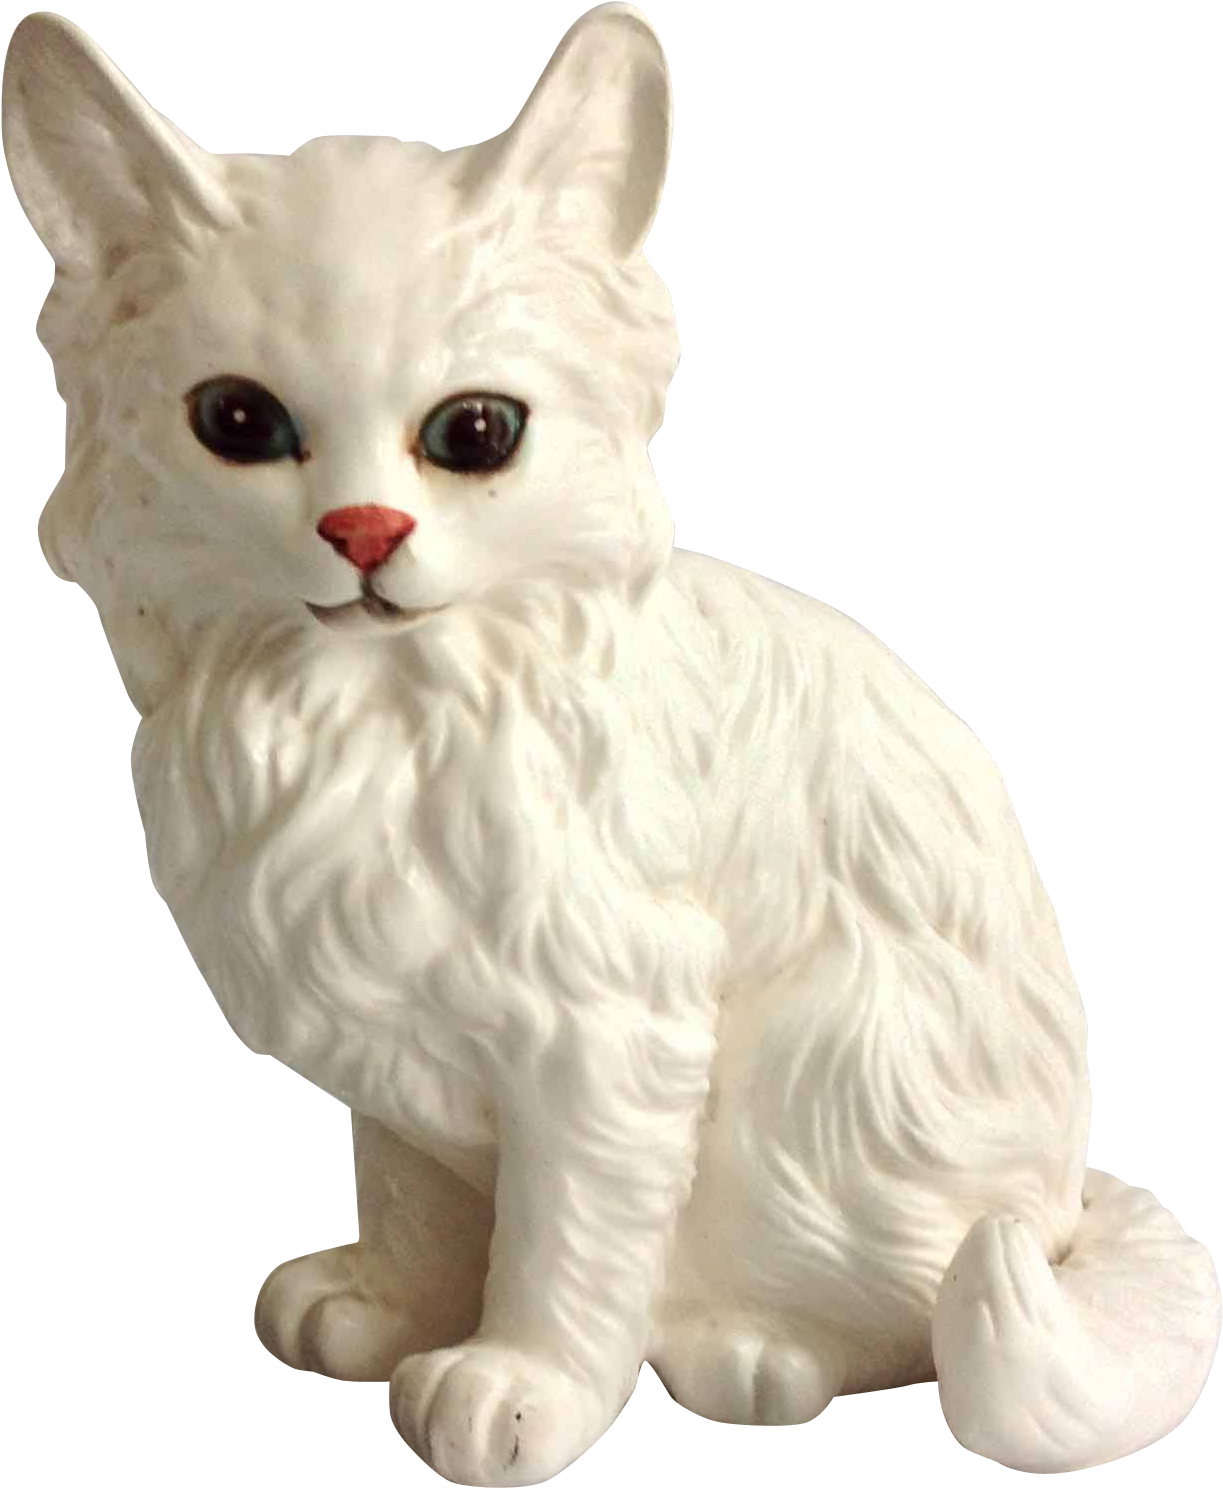 A White Cat Statue With A Red Nose